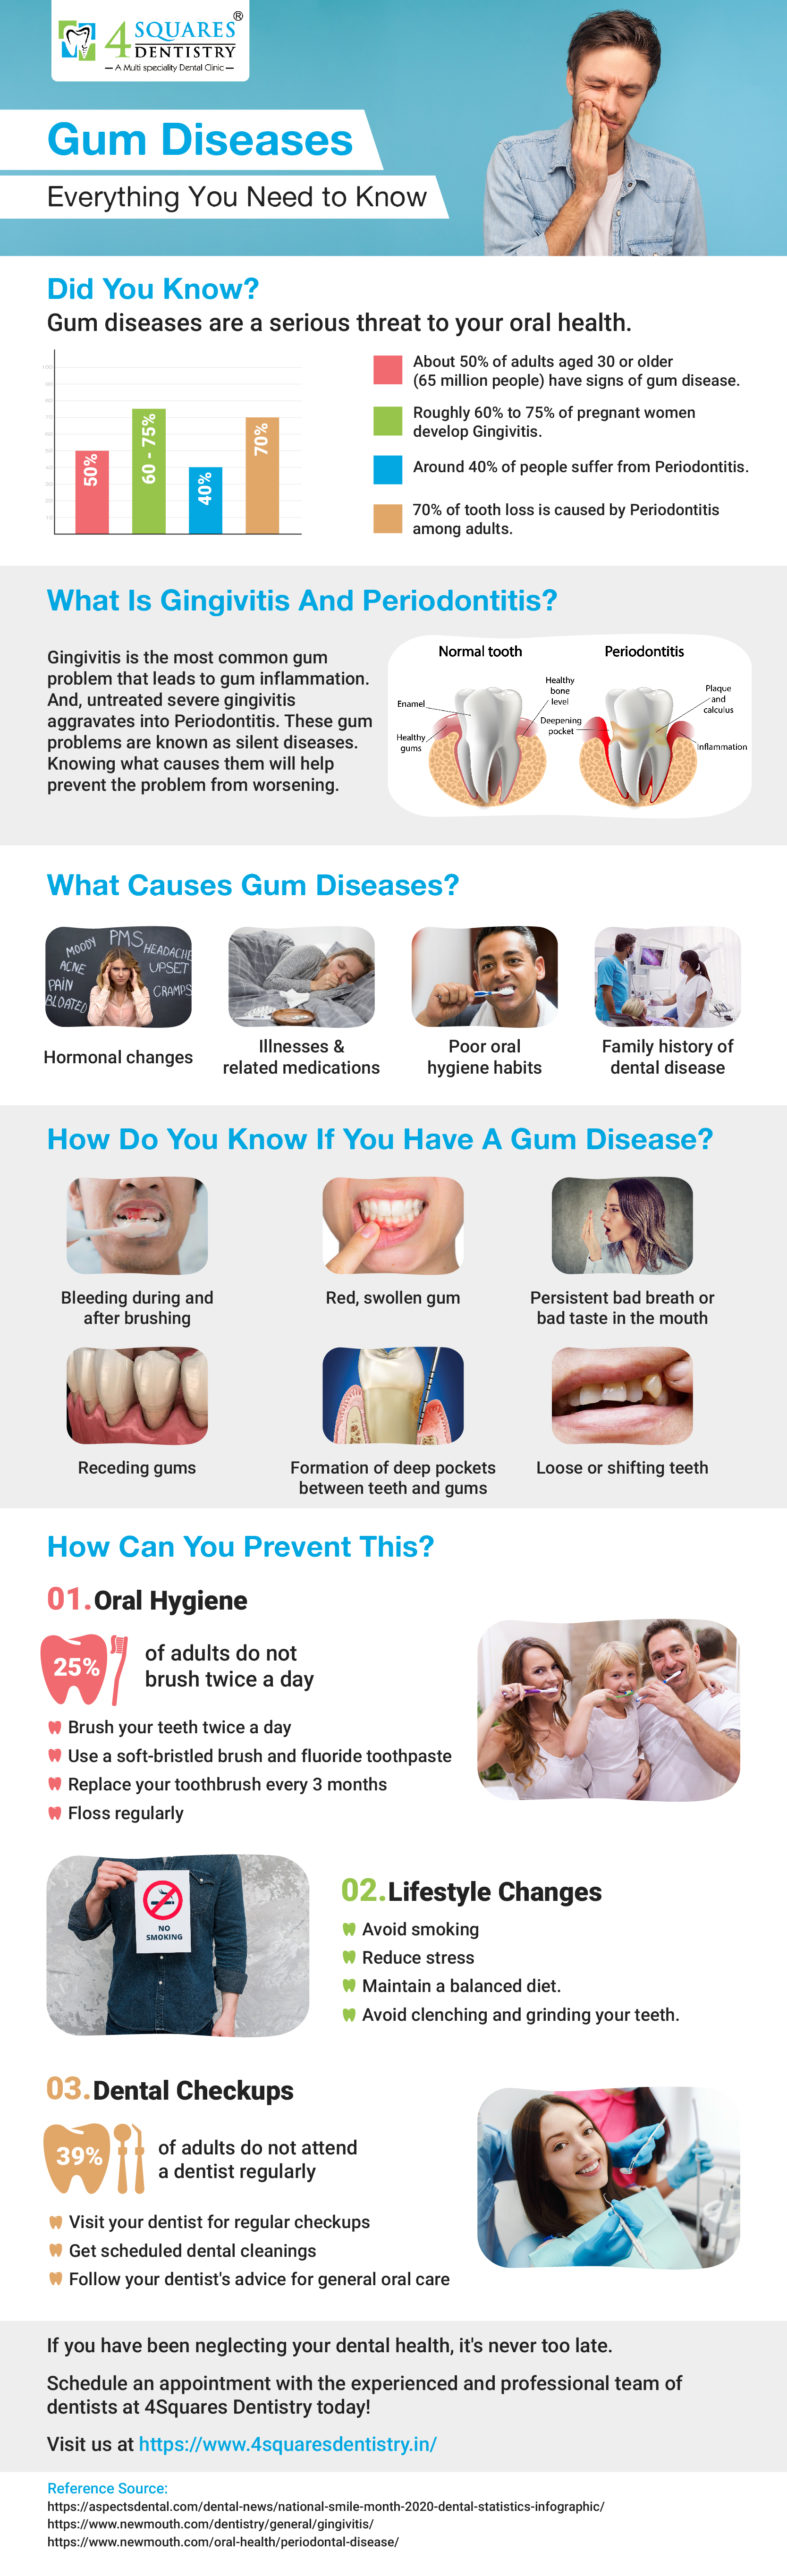 All About Gum Diseases - Infographics King